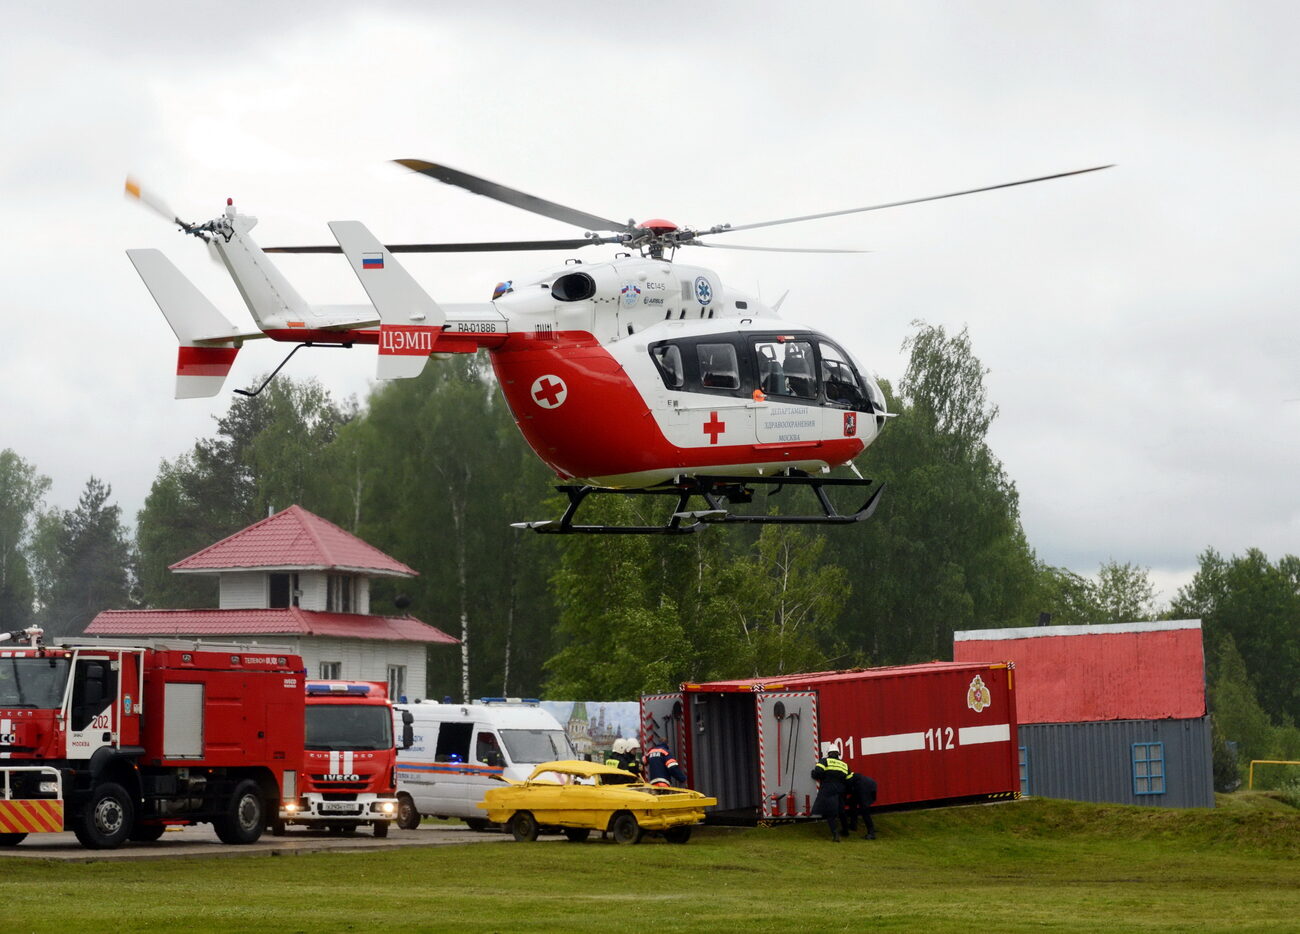 Emergency Vehicles including a helicopter, ambulance, and firetruck